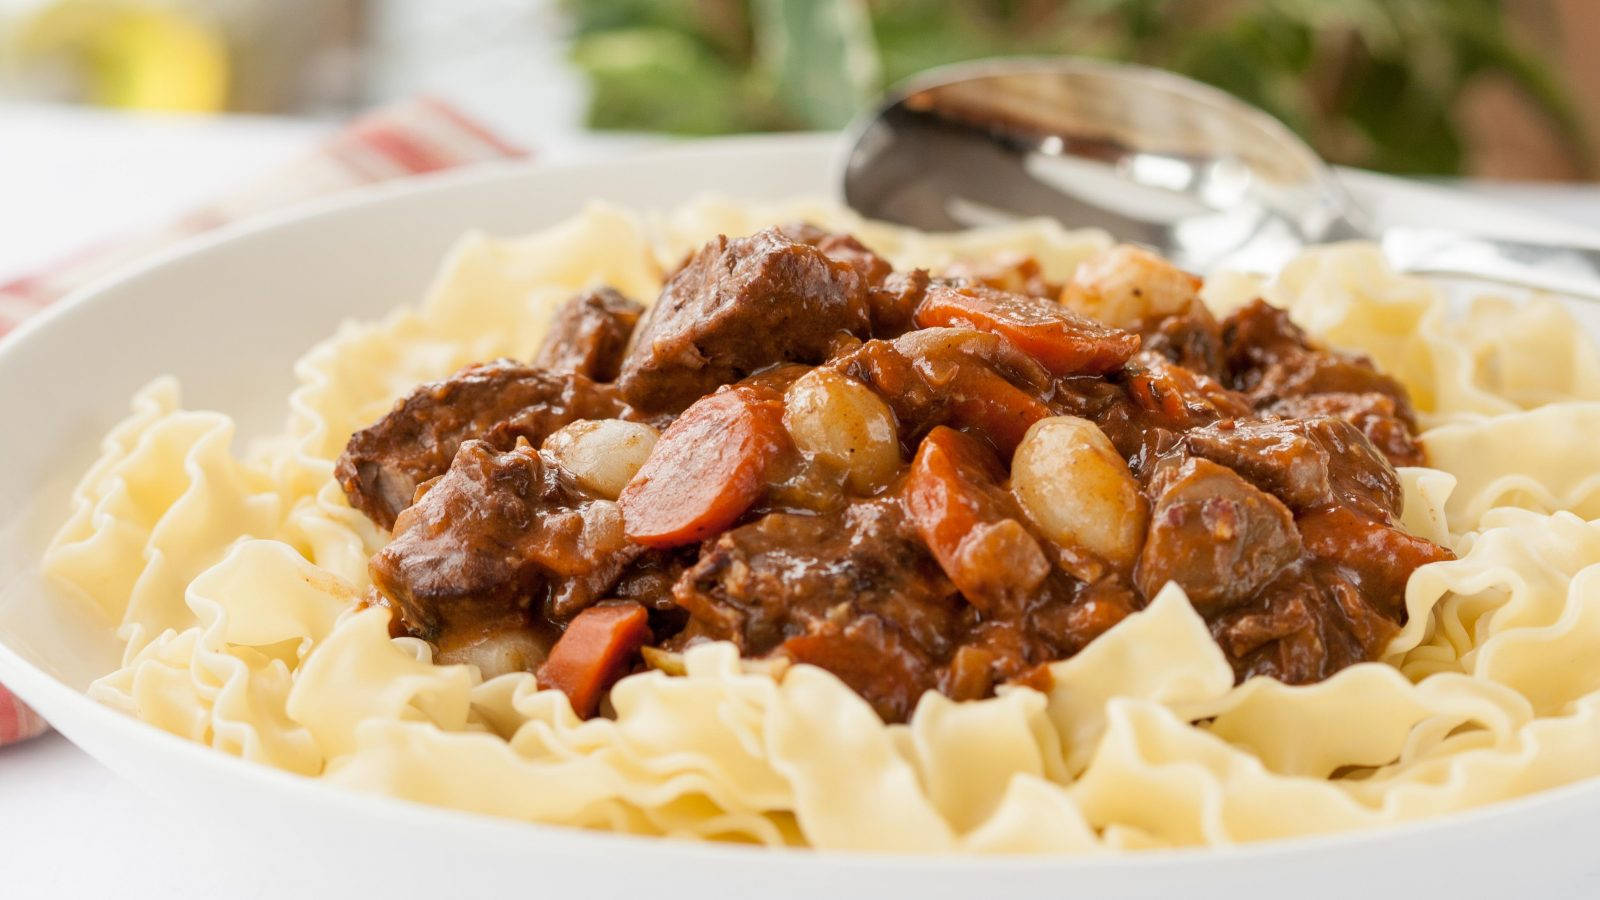 Beefbourguignon Fettuccine Cannot Be Translated In Context Of Computer Or Mobile Wallpaper Because It Is A Dish, Not Related To Wallpapers. Can You Please Provide Another Sentence For Me To Translate? Wallpaper